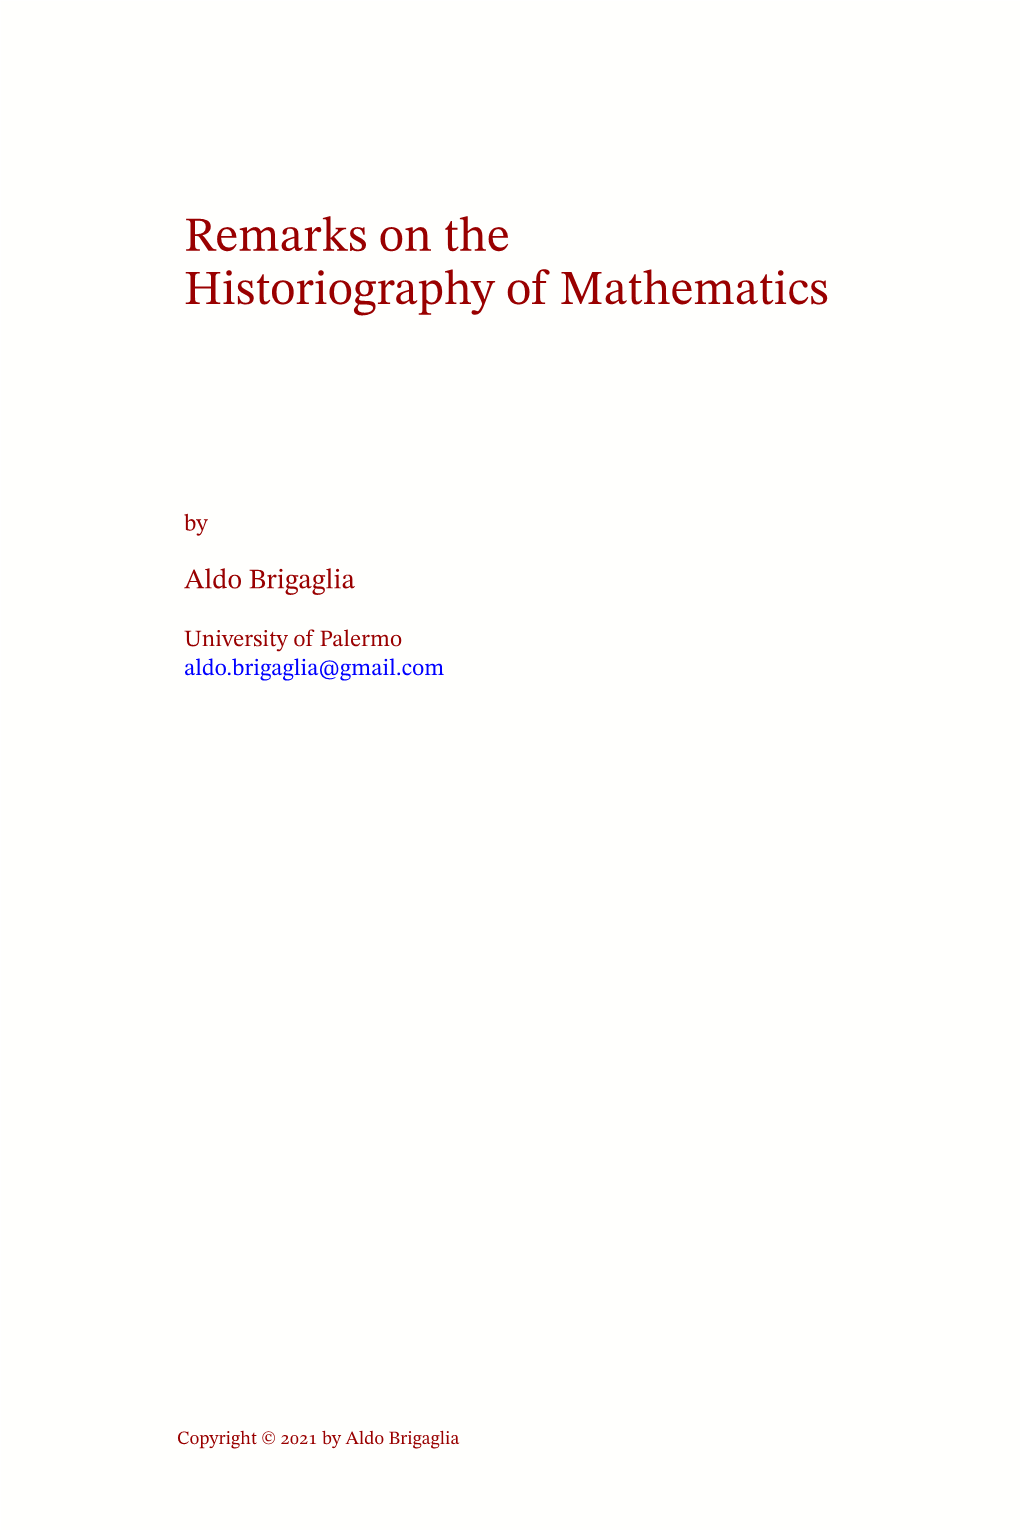 Remarks on the Historiography of Mathematics